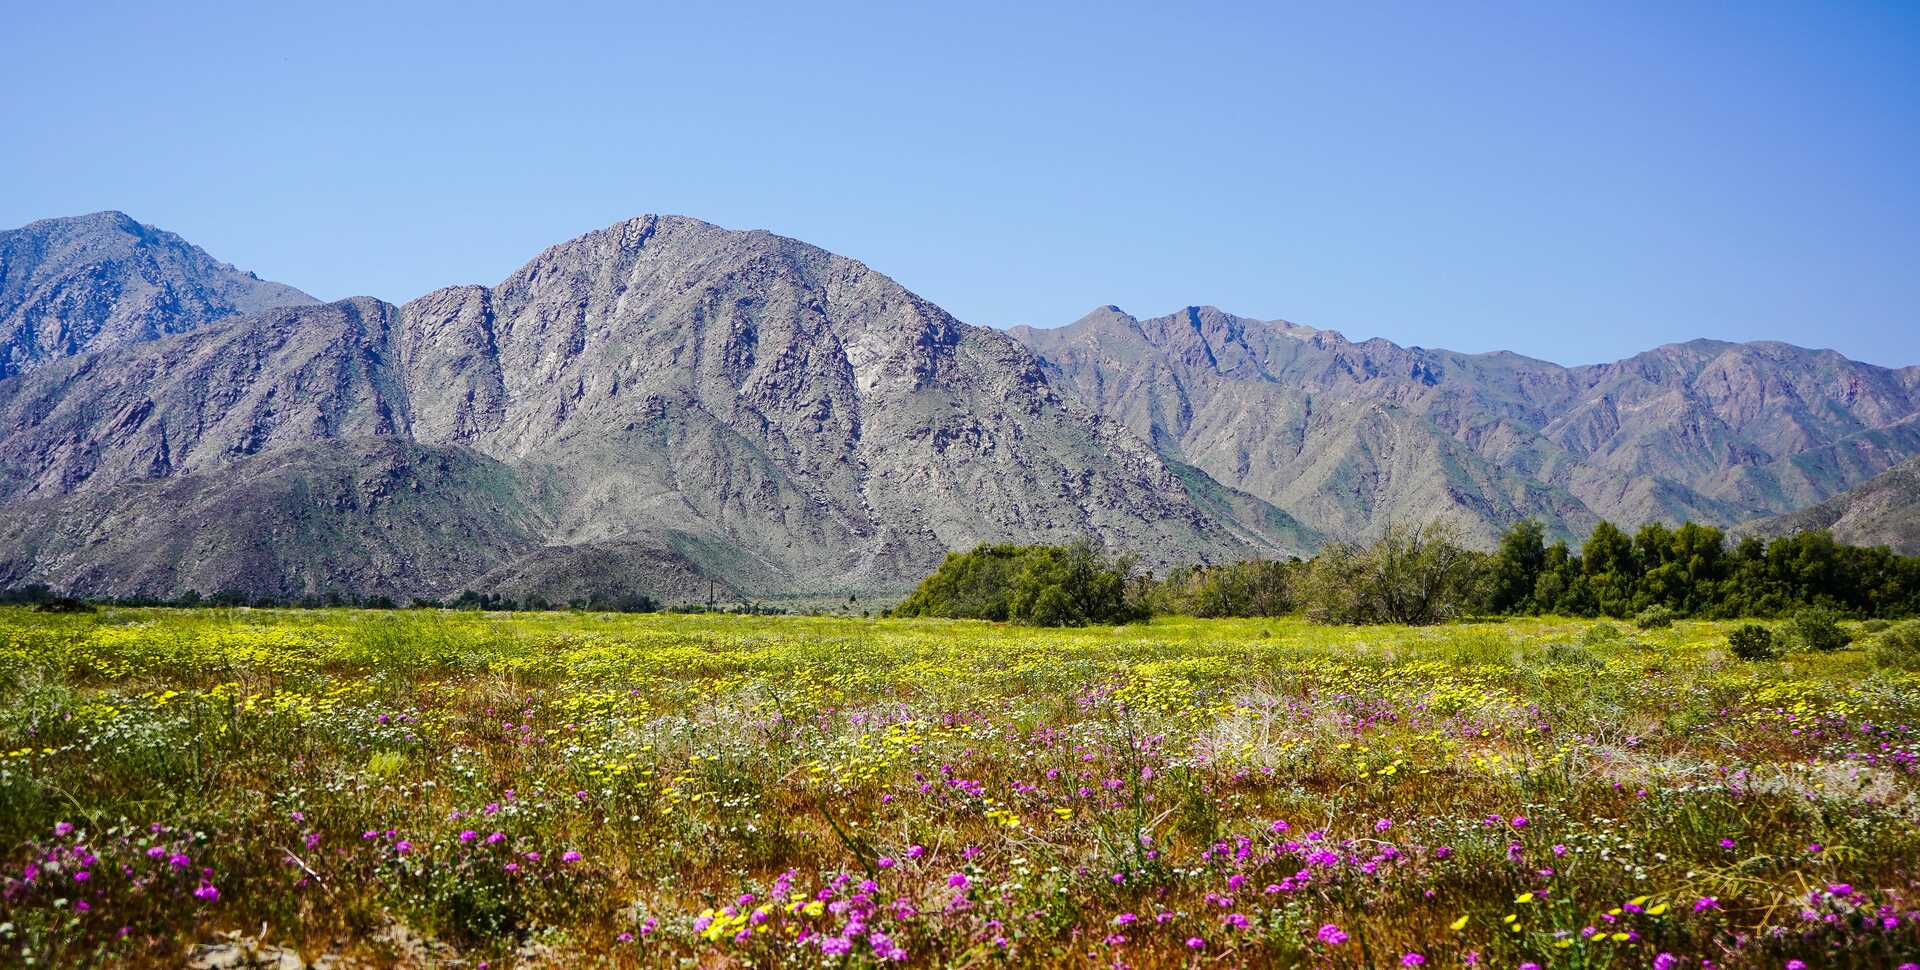 Dramatic vista in Anza Borrego state park with mountains in background and field of wildflowers in foreground